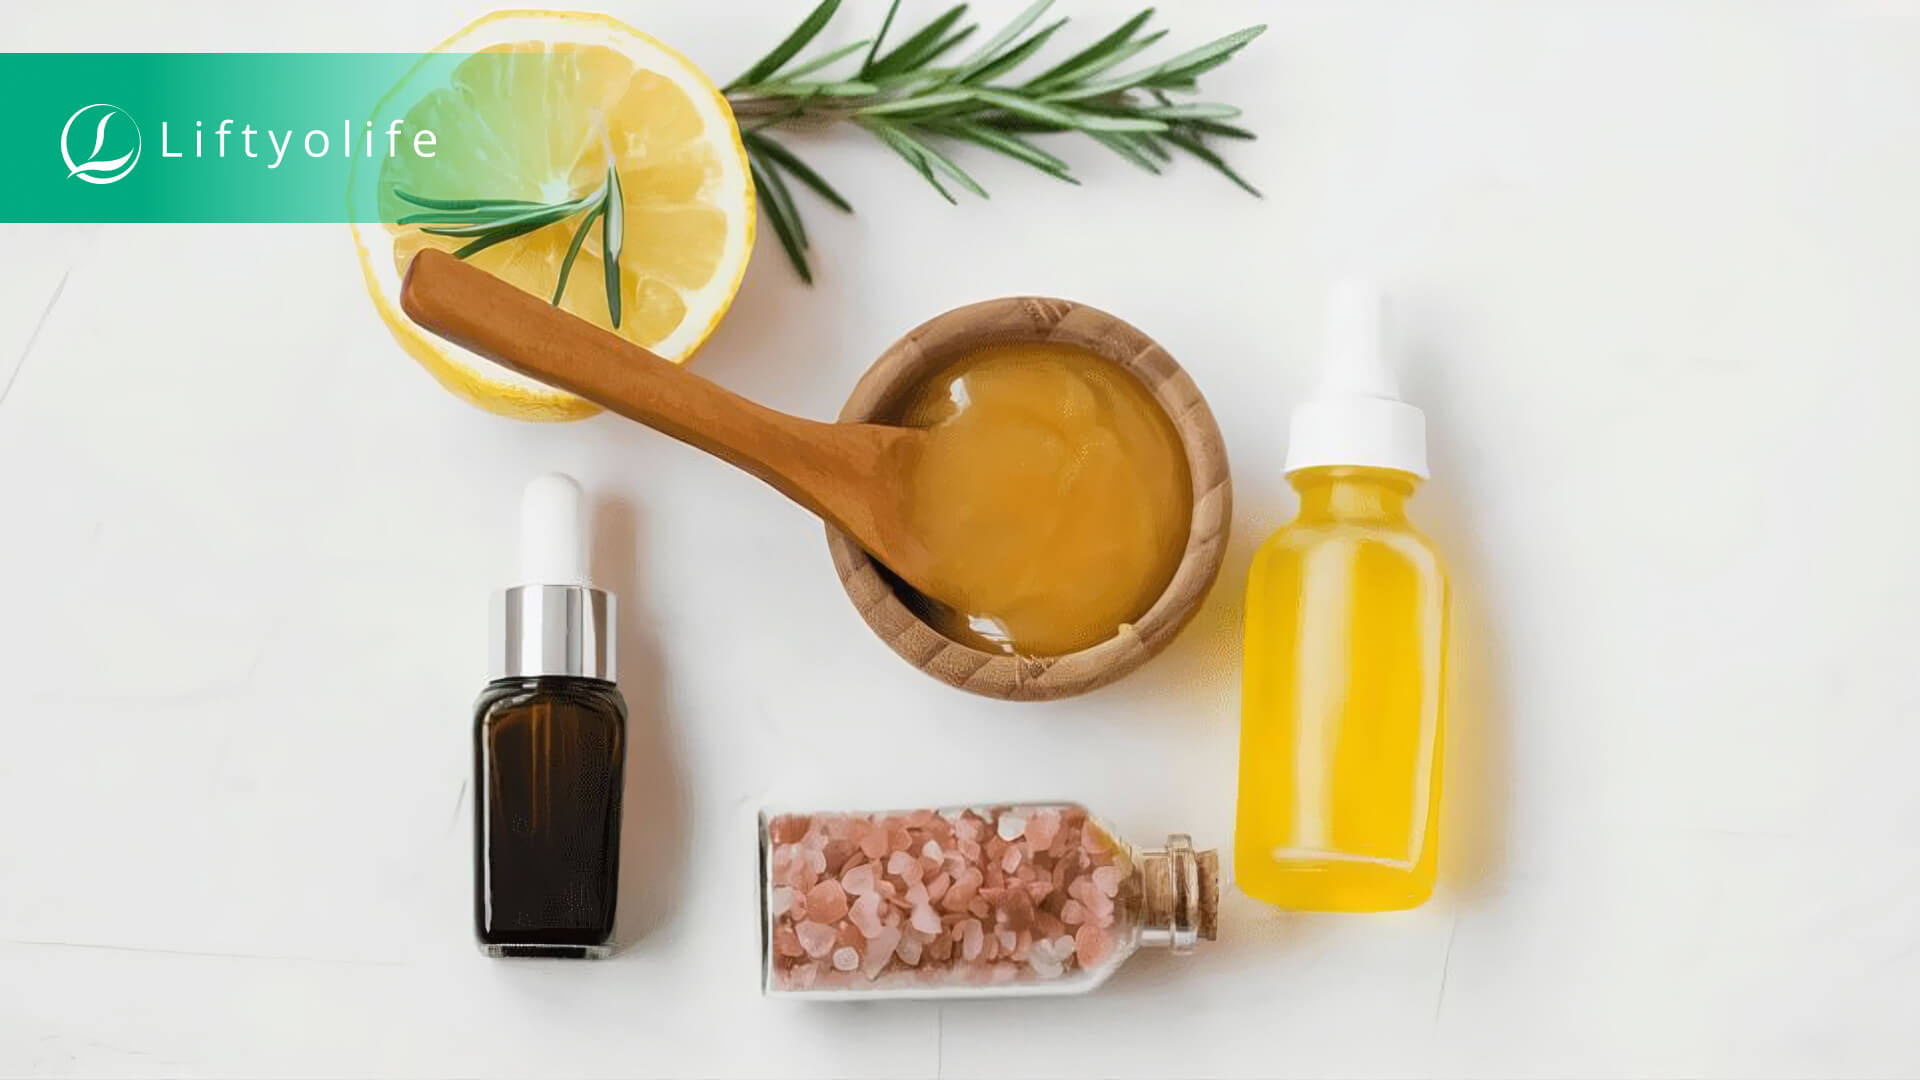 Acne-fighting skincare ingredients